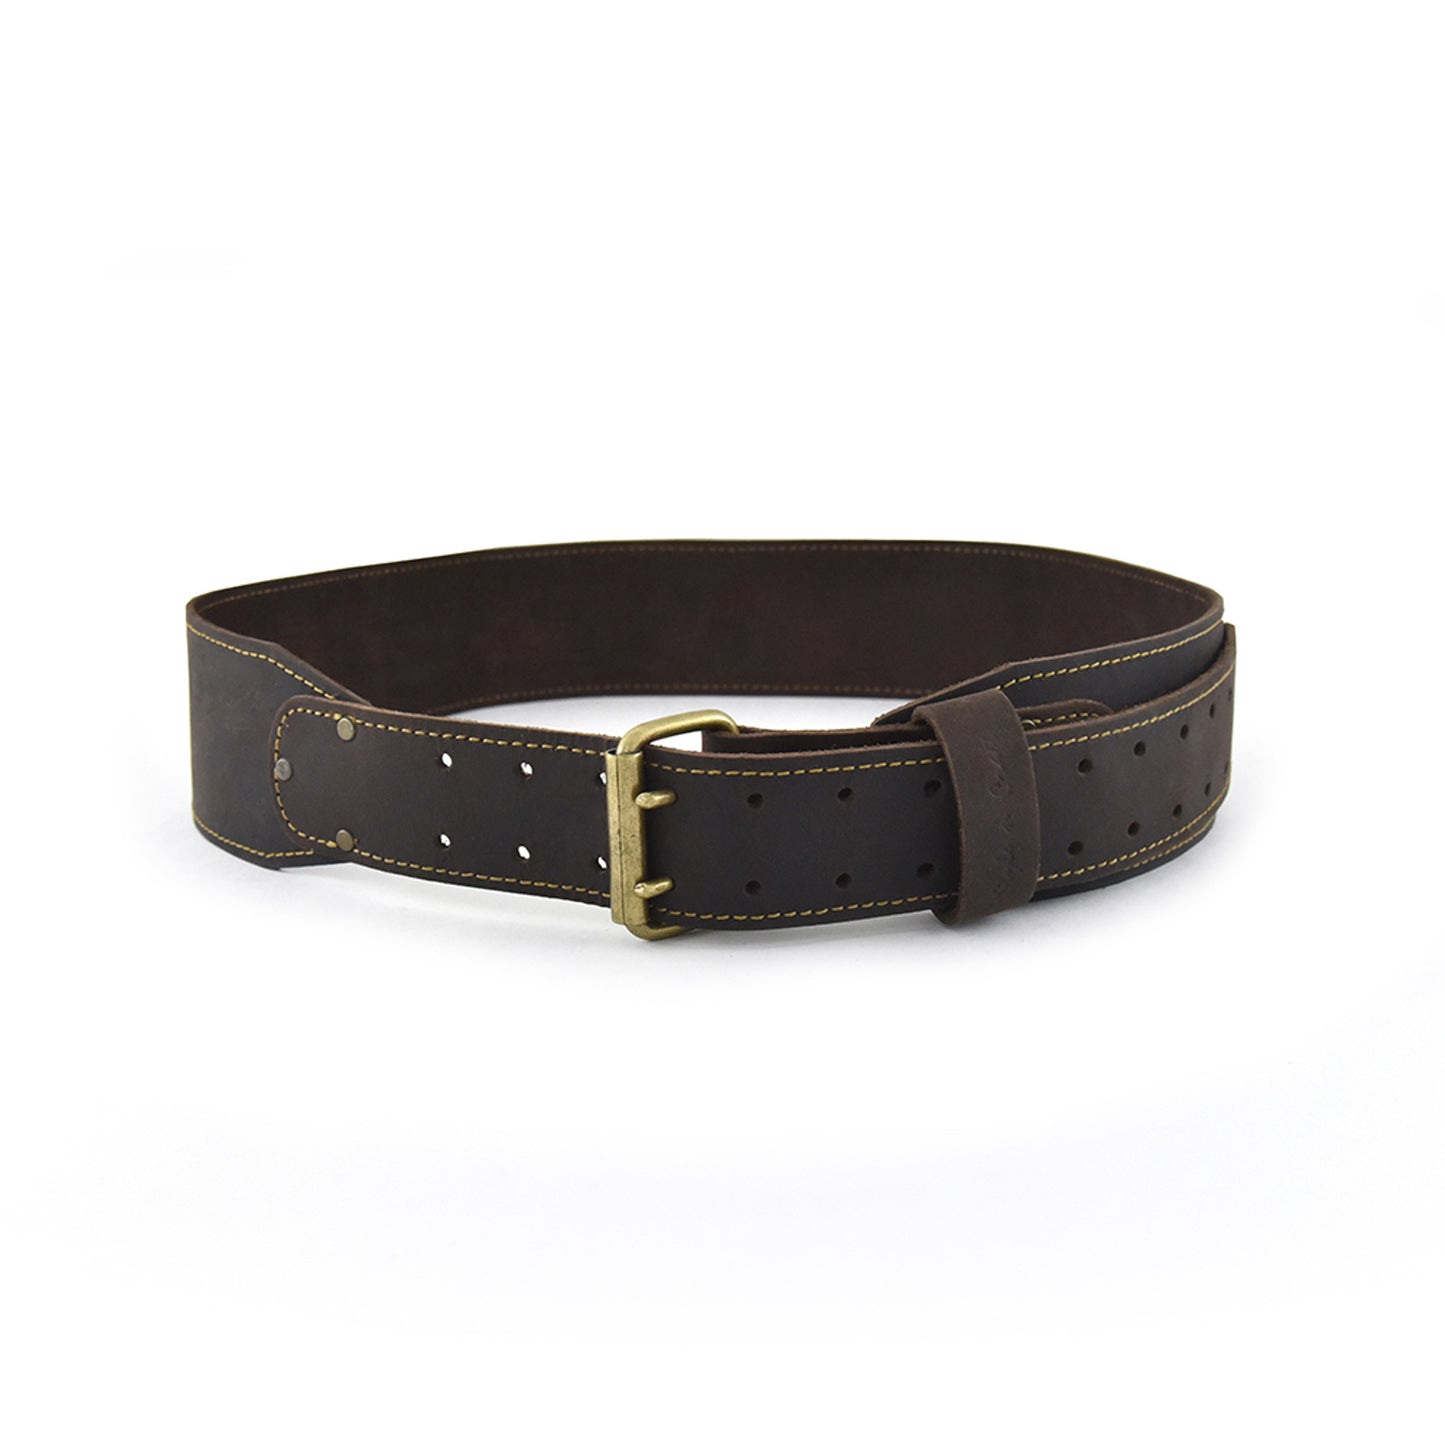 74055 -3 Inch Wide Long Tapered Leather Work Belt in Oiled Leather in Dark Brown Color - Front View